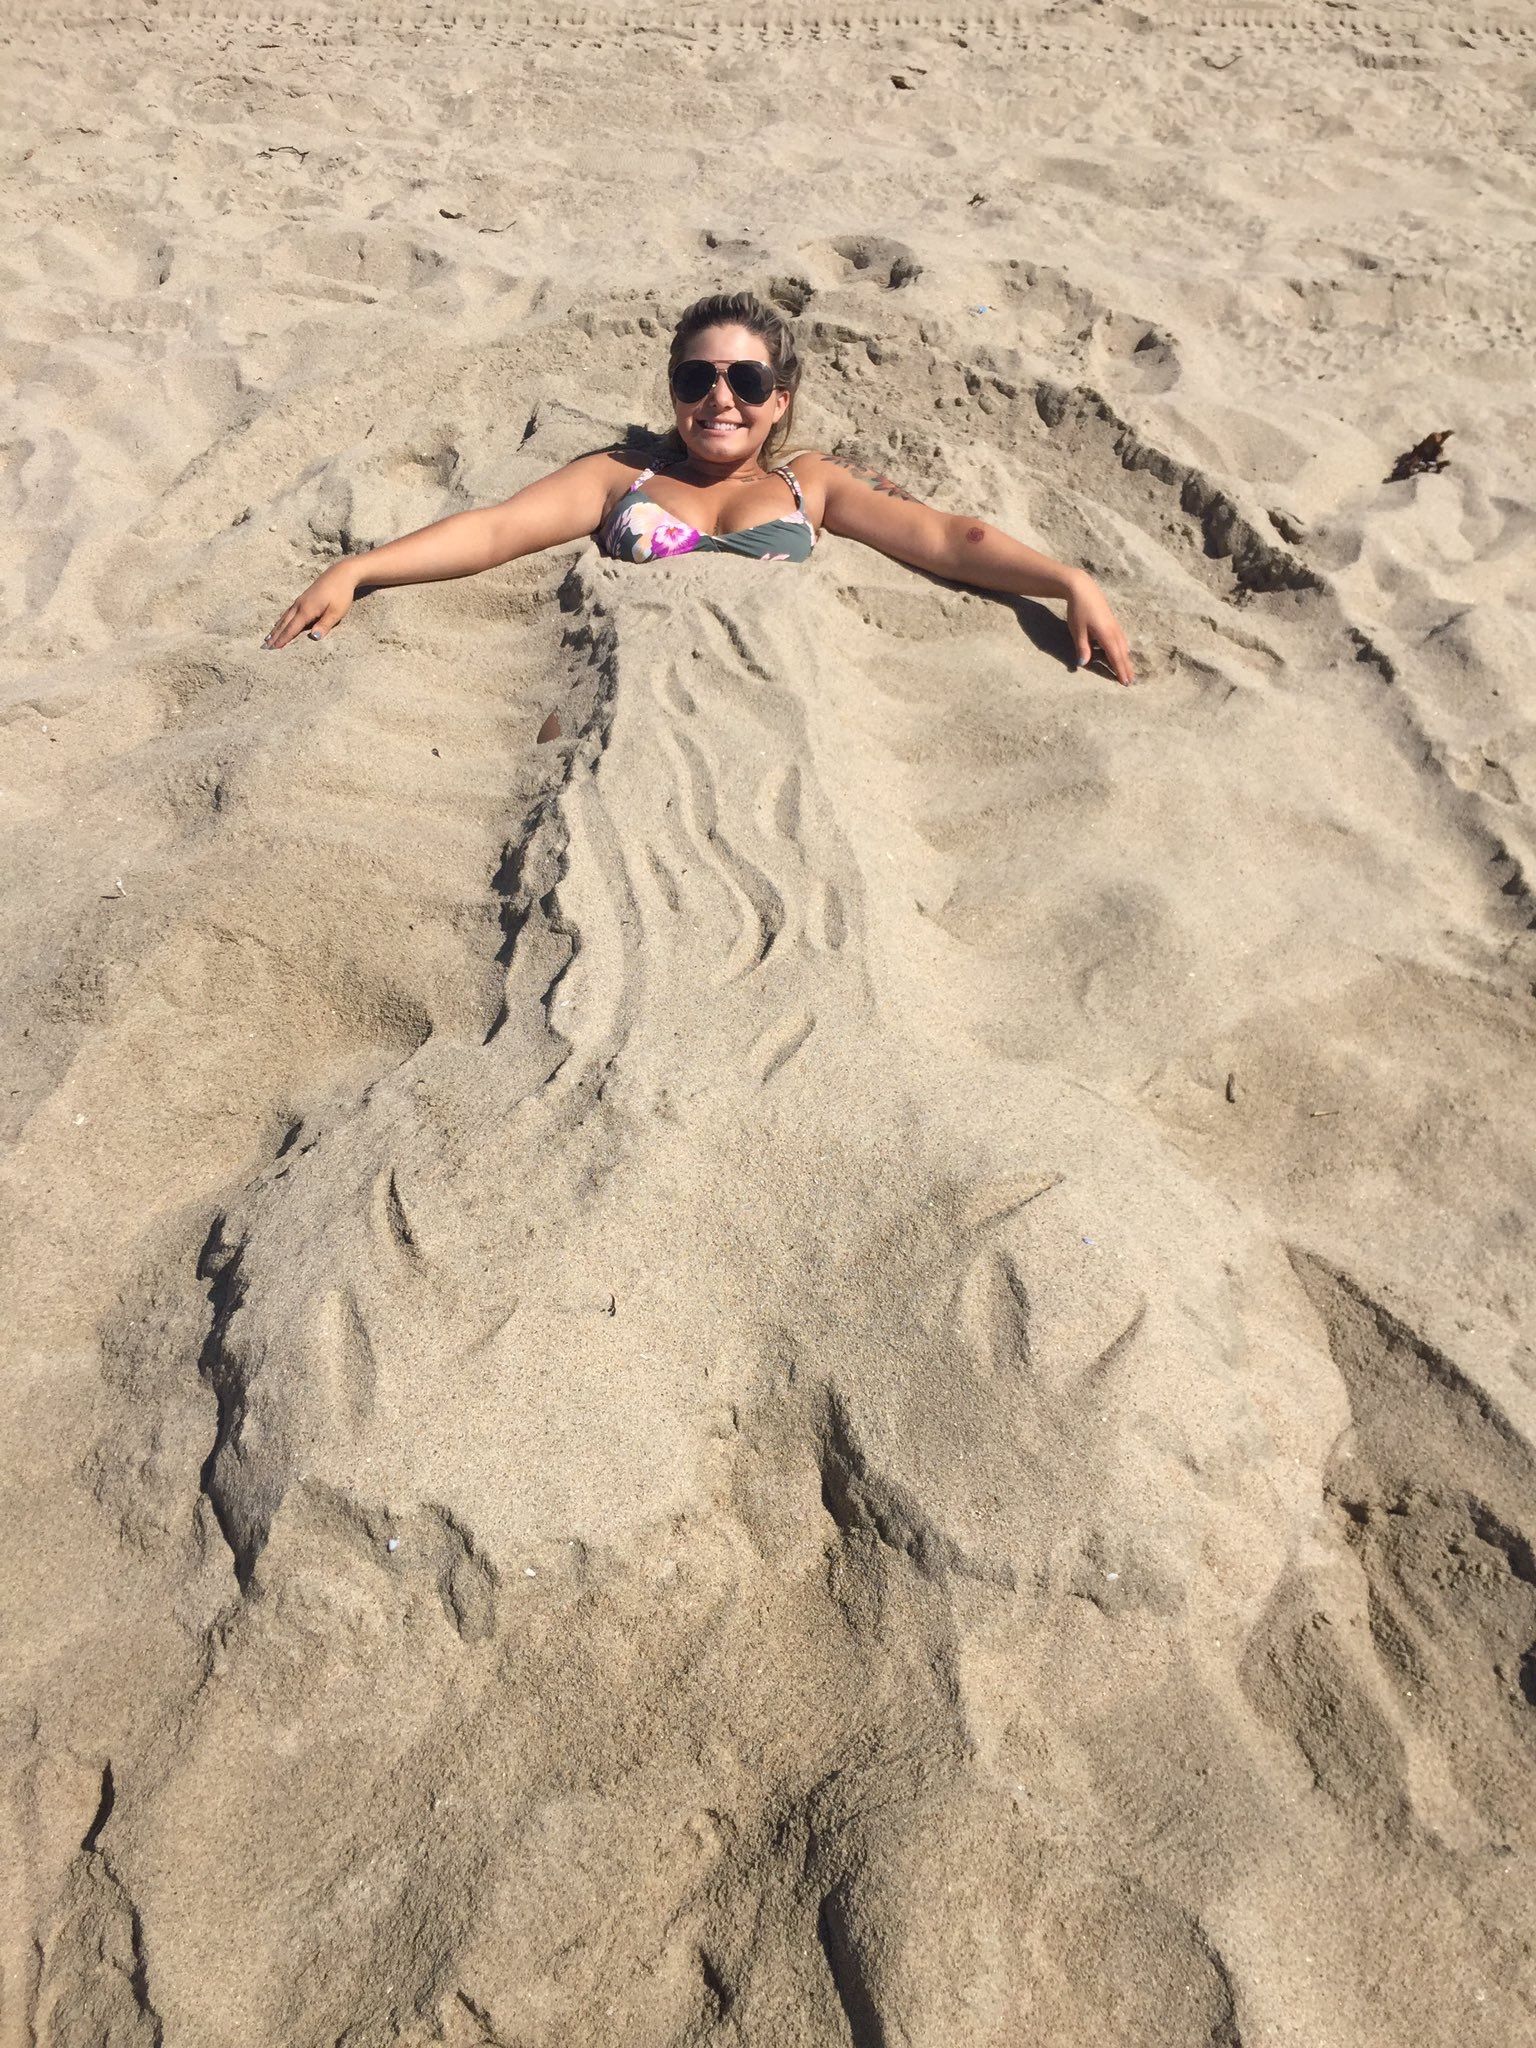 She thought Alex was making her into a mermaid.